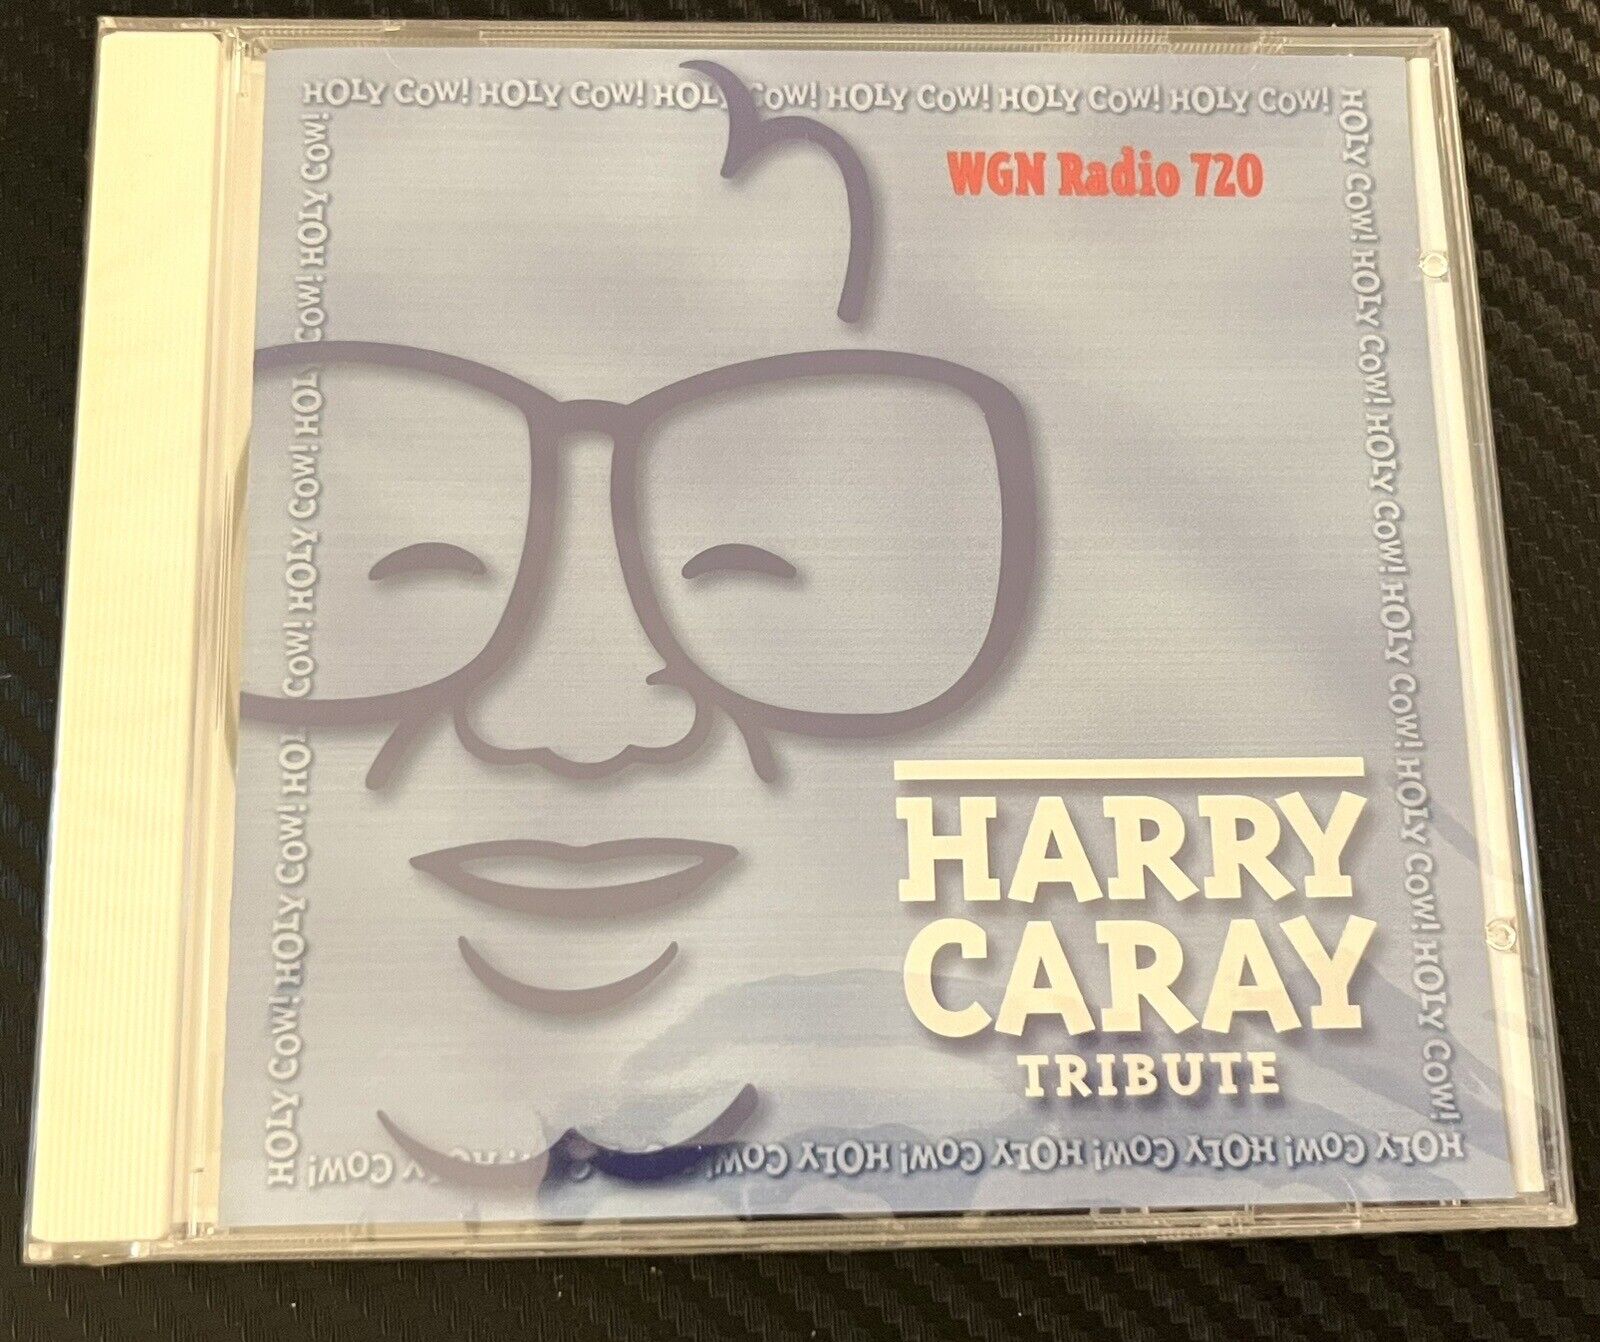 Harry Caray Tribute WGN Radio 720 HOLY COW MLB Chicago Cubs (CD 1998) New Sealed